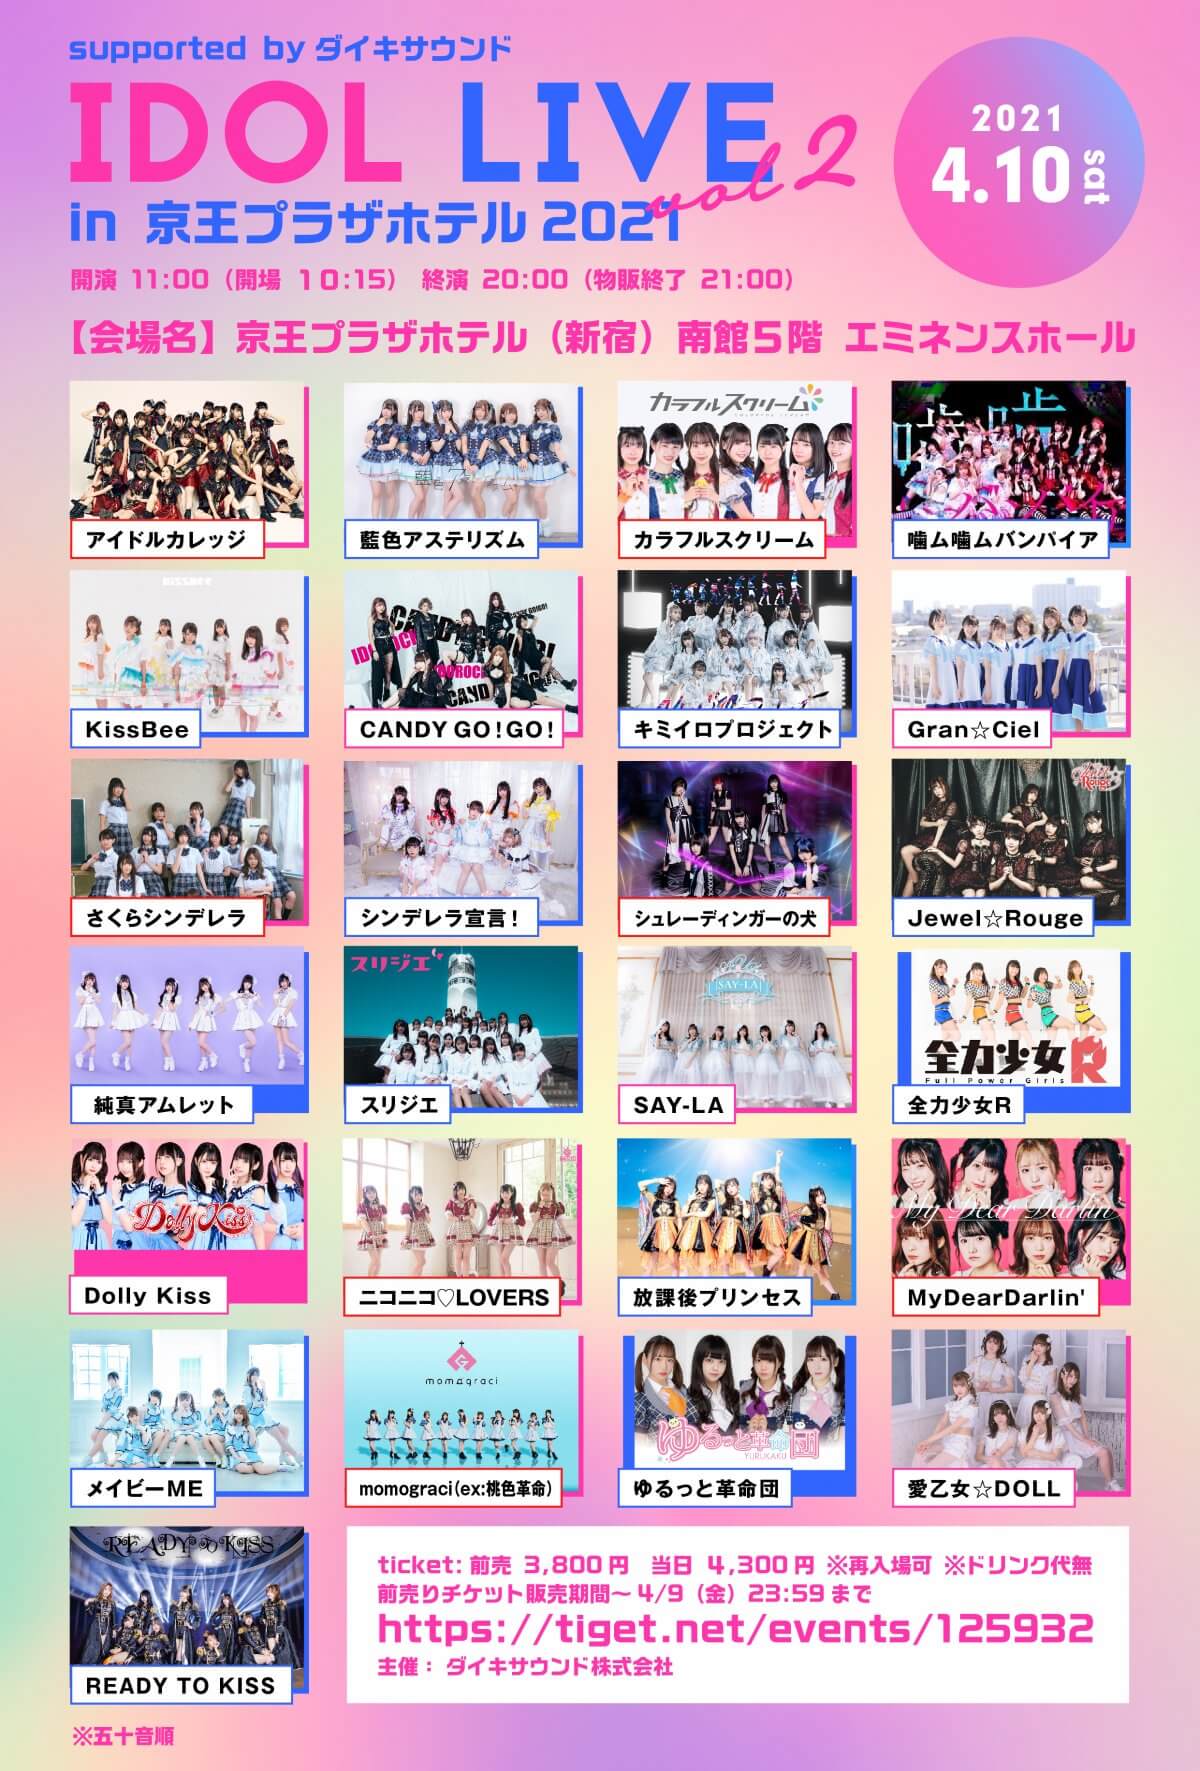 IDOL LIVE in 京王プラザホテル2021 vol,2 supported byダイキサウンド